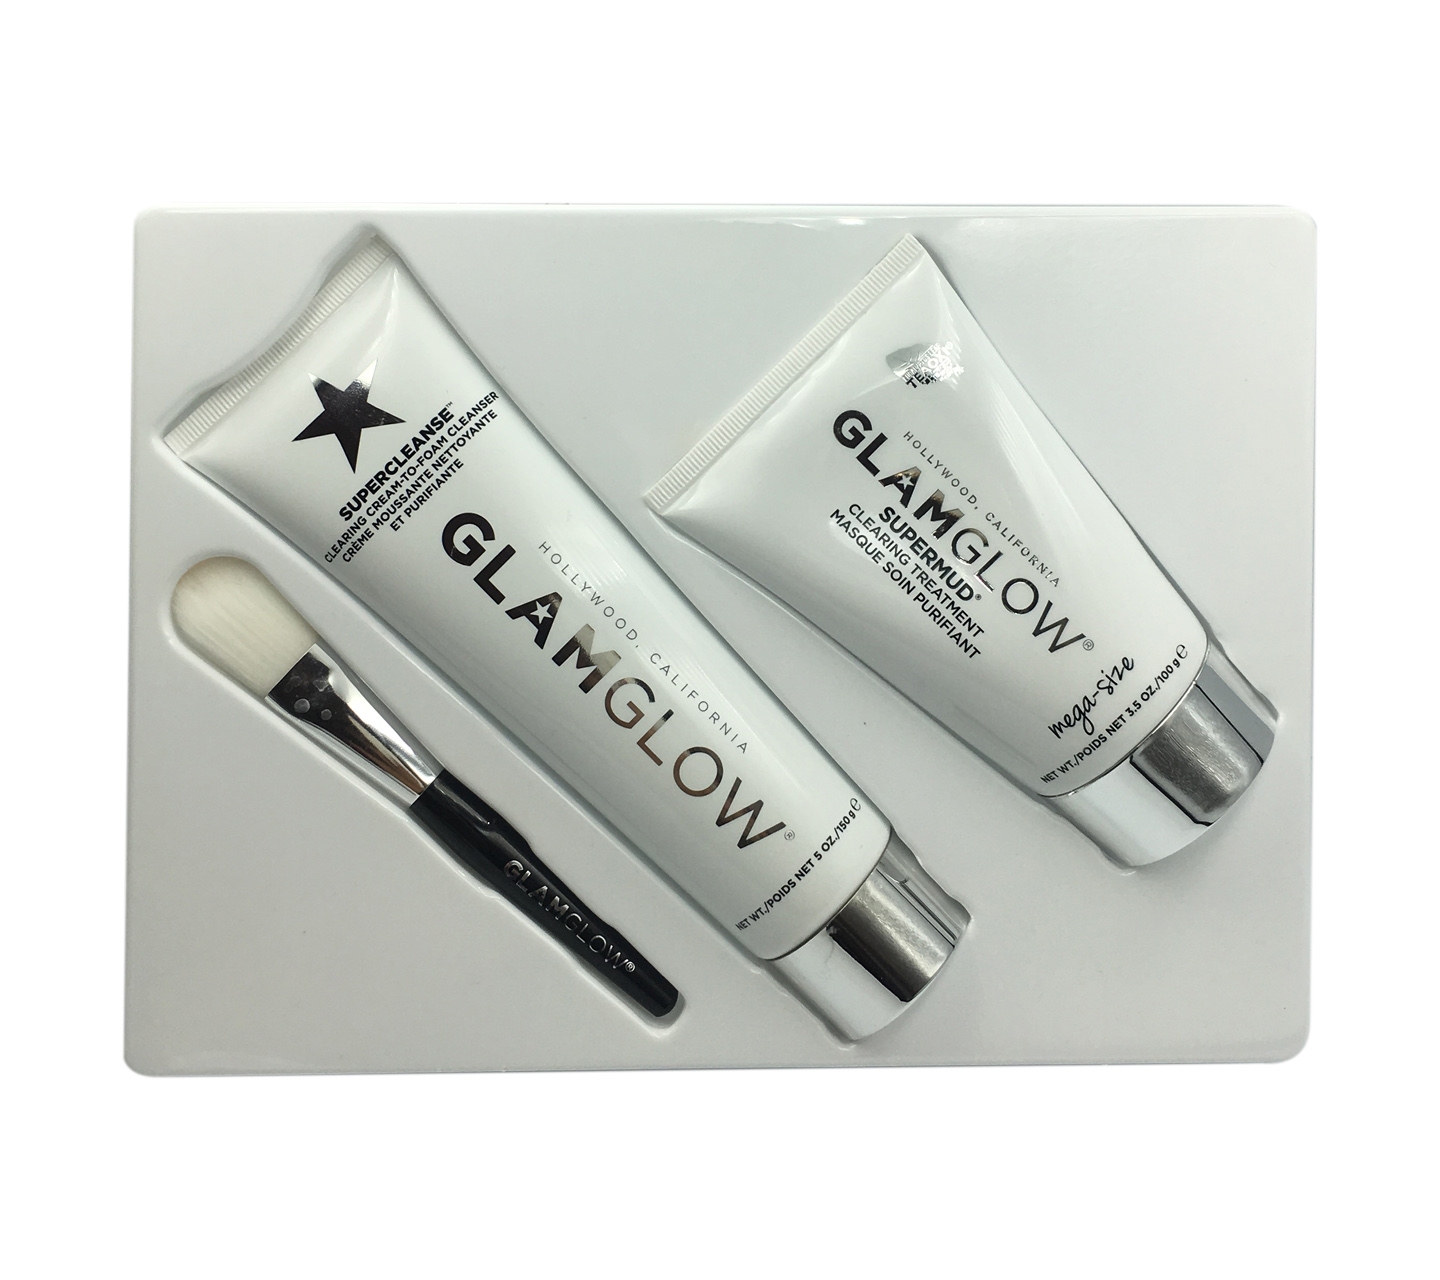 Glam Glow The Art of Glowing Skin Supermud Clearing Treatment Sets and Palette